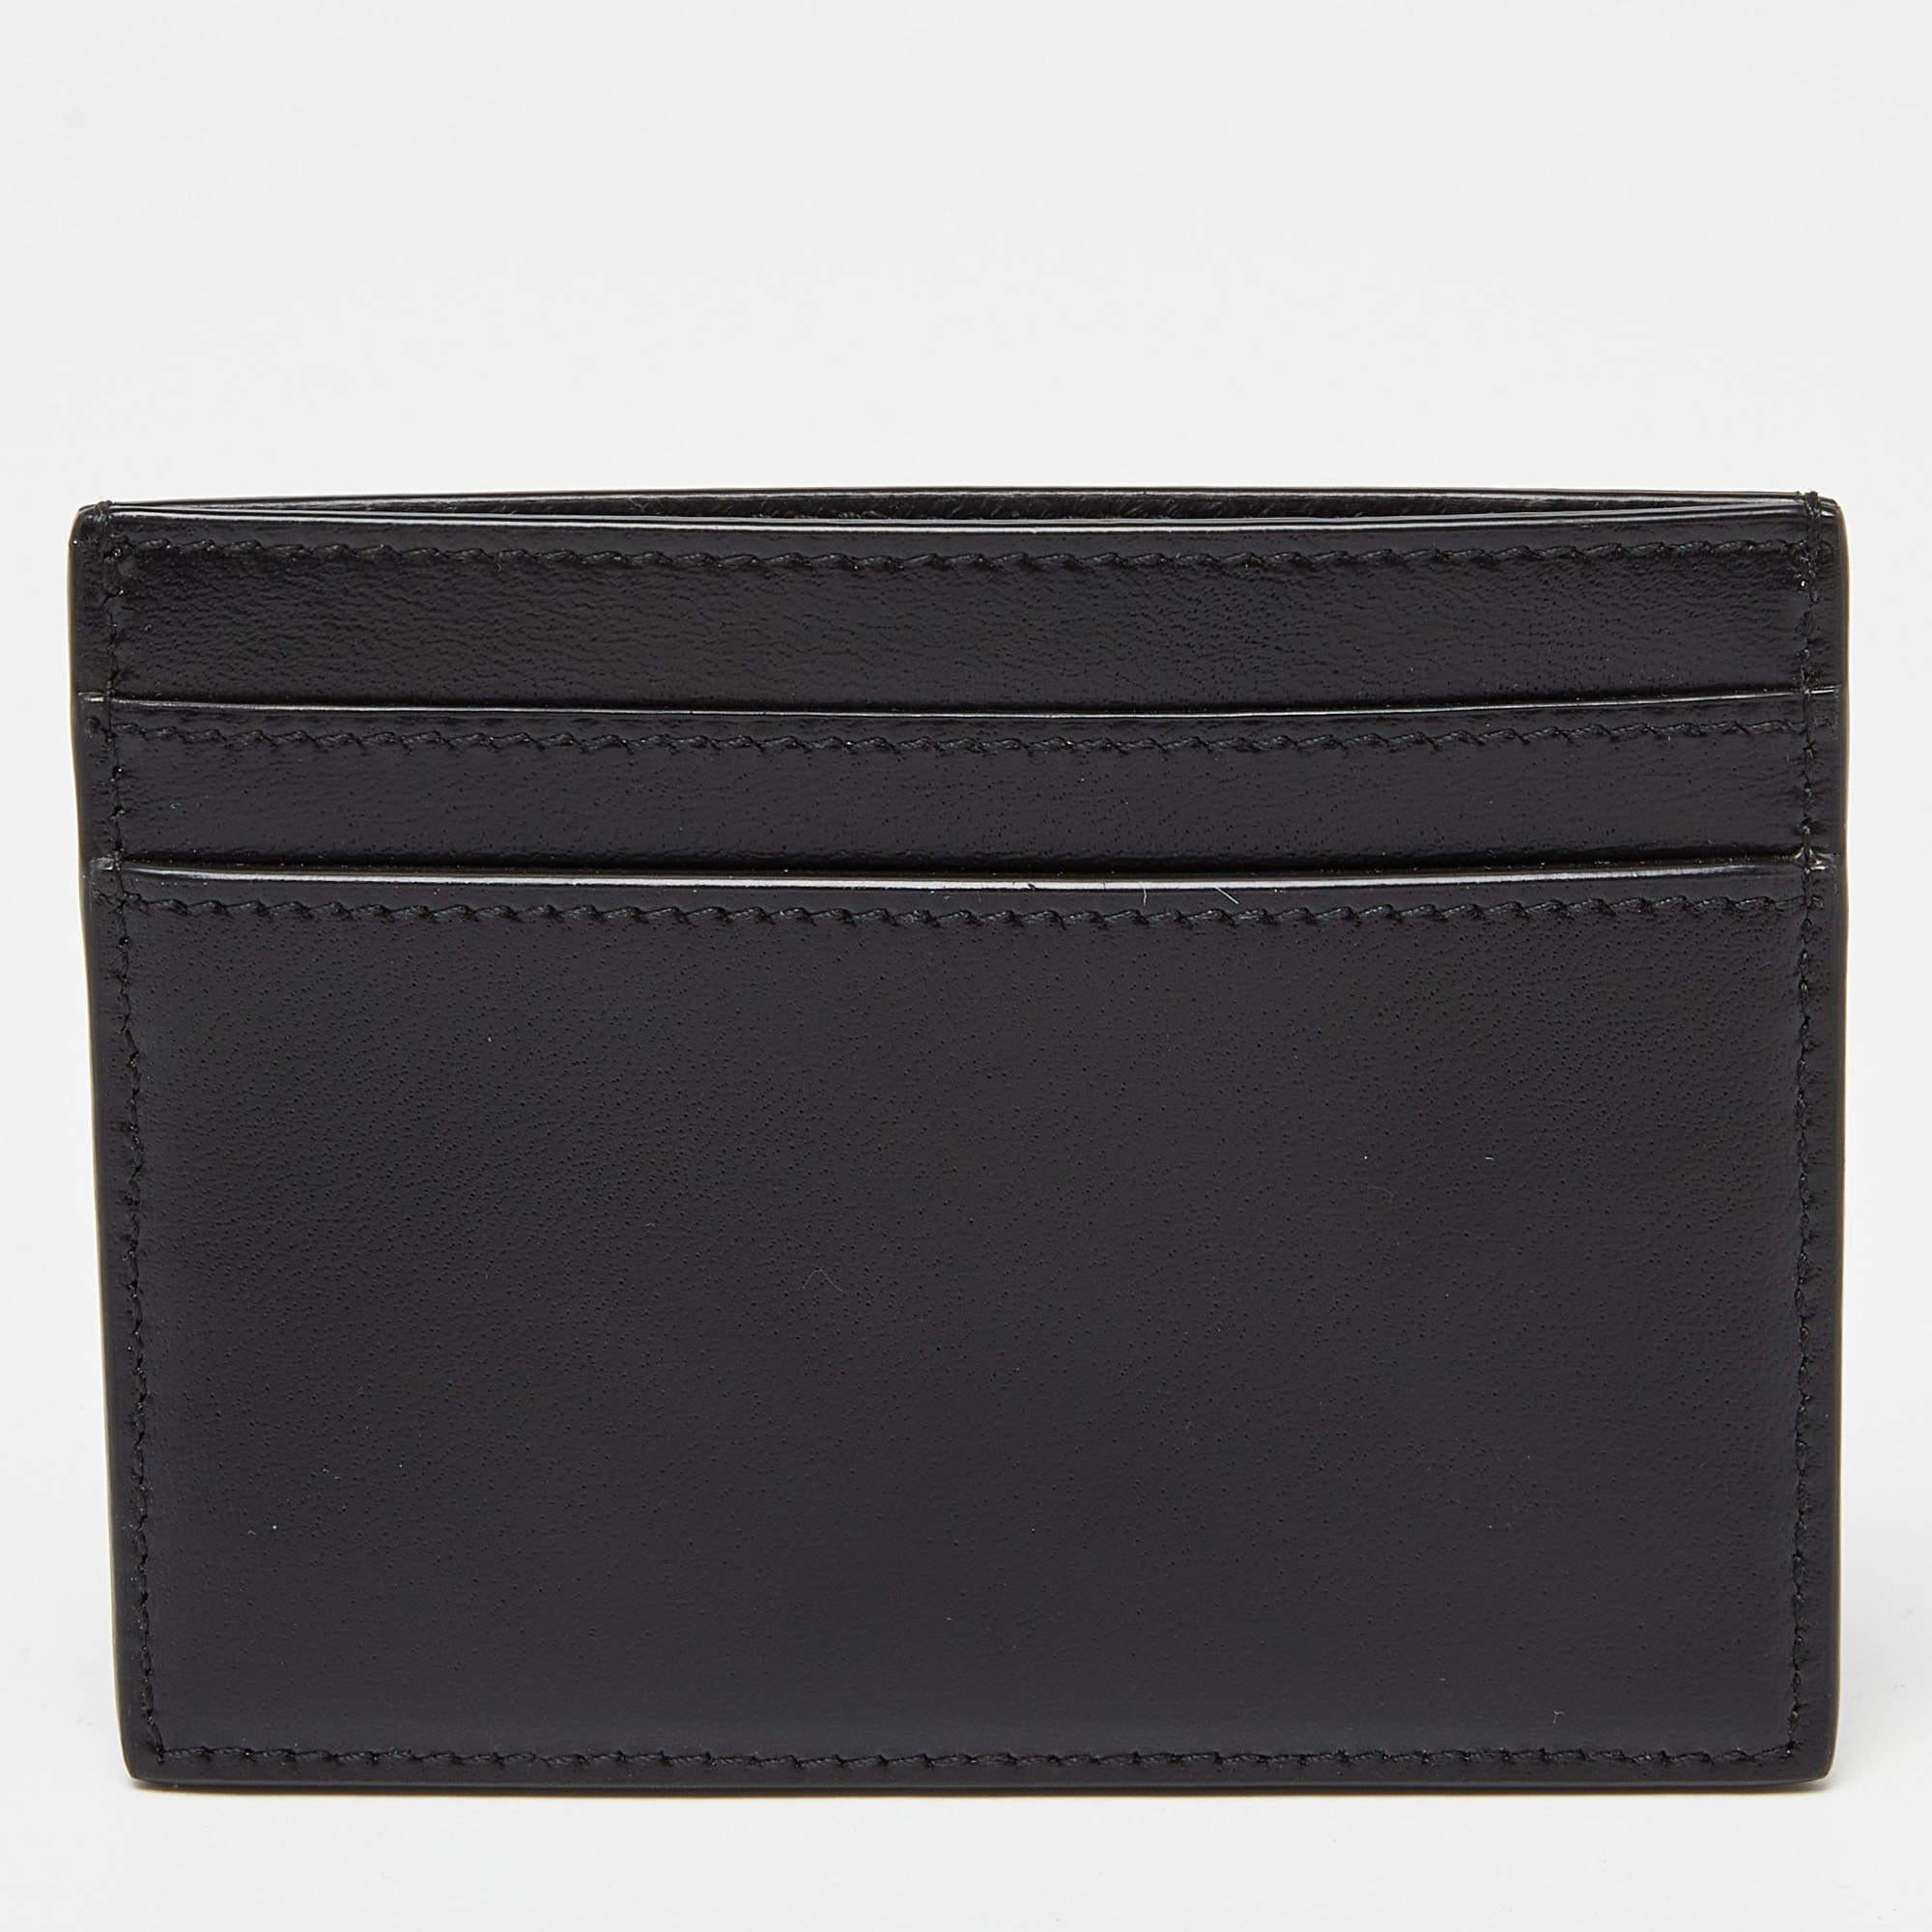 From the house of Saint Laurent, this black card holder made from leather is the perfect accessory to keep your cards in proper order. The smooth leather interior features multiple slots. Adorned with a silver-tone YSL logo at the front, it is truly